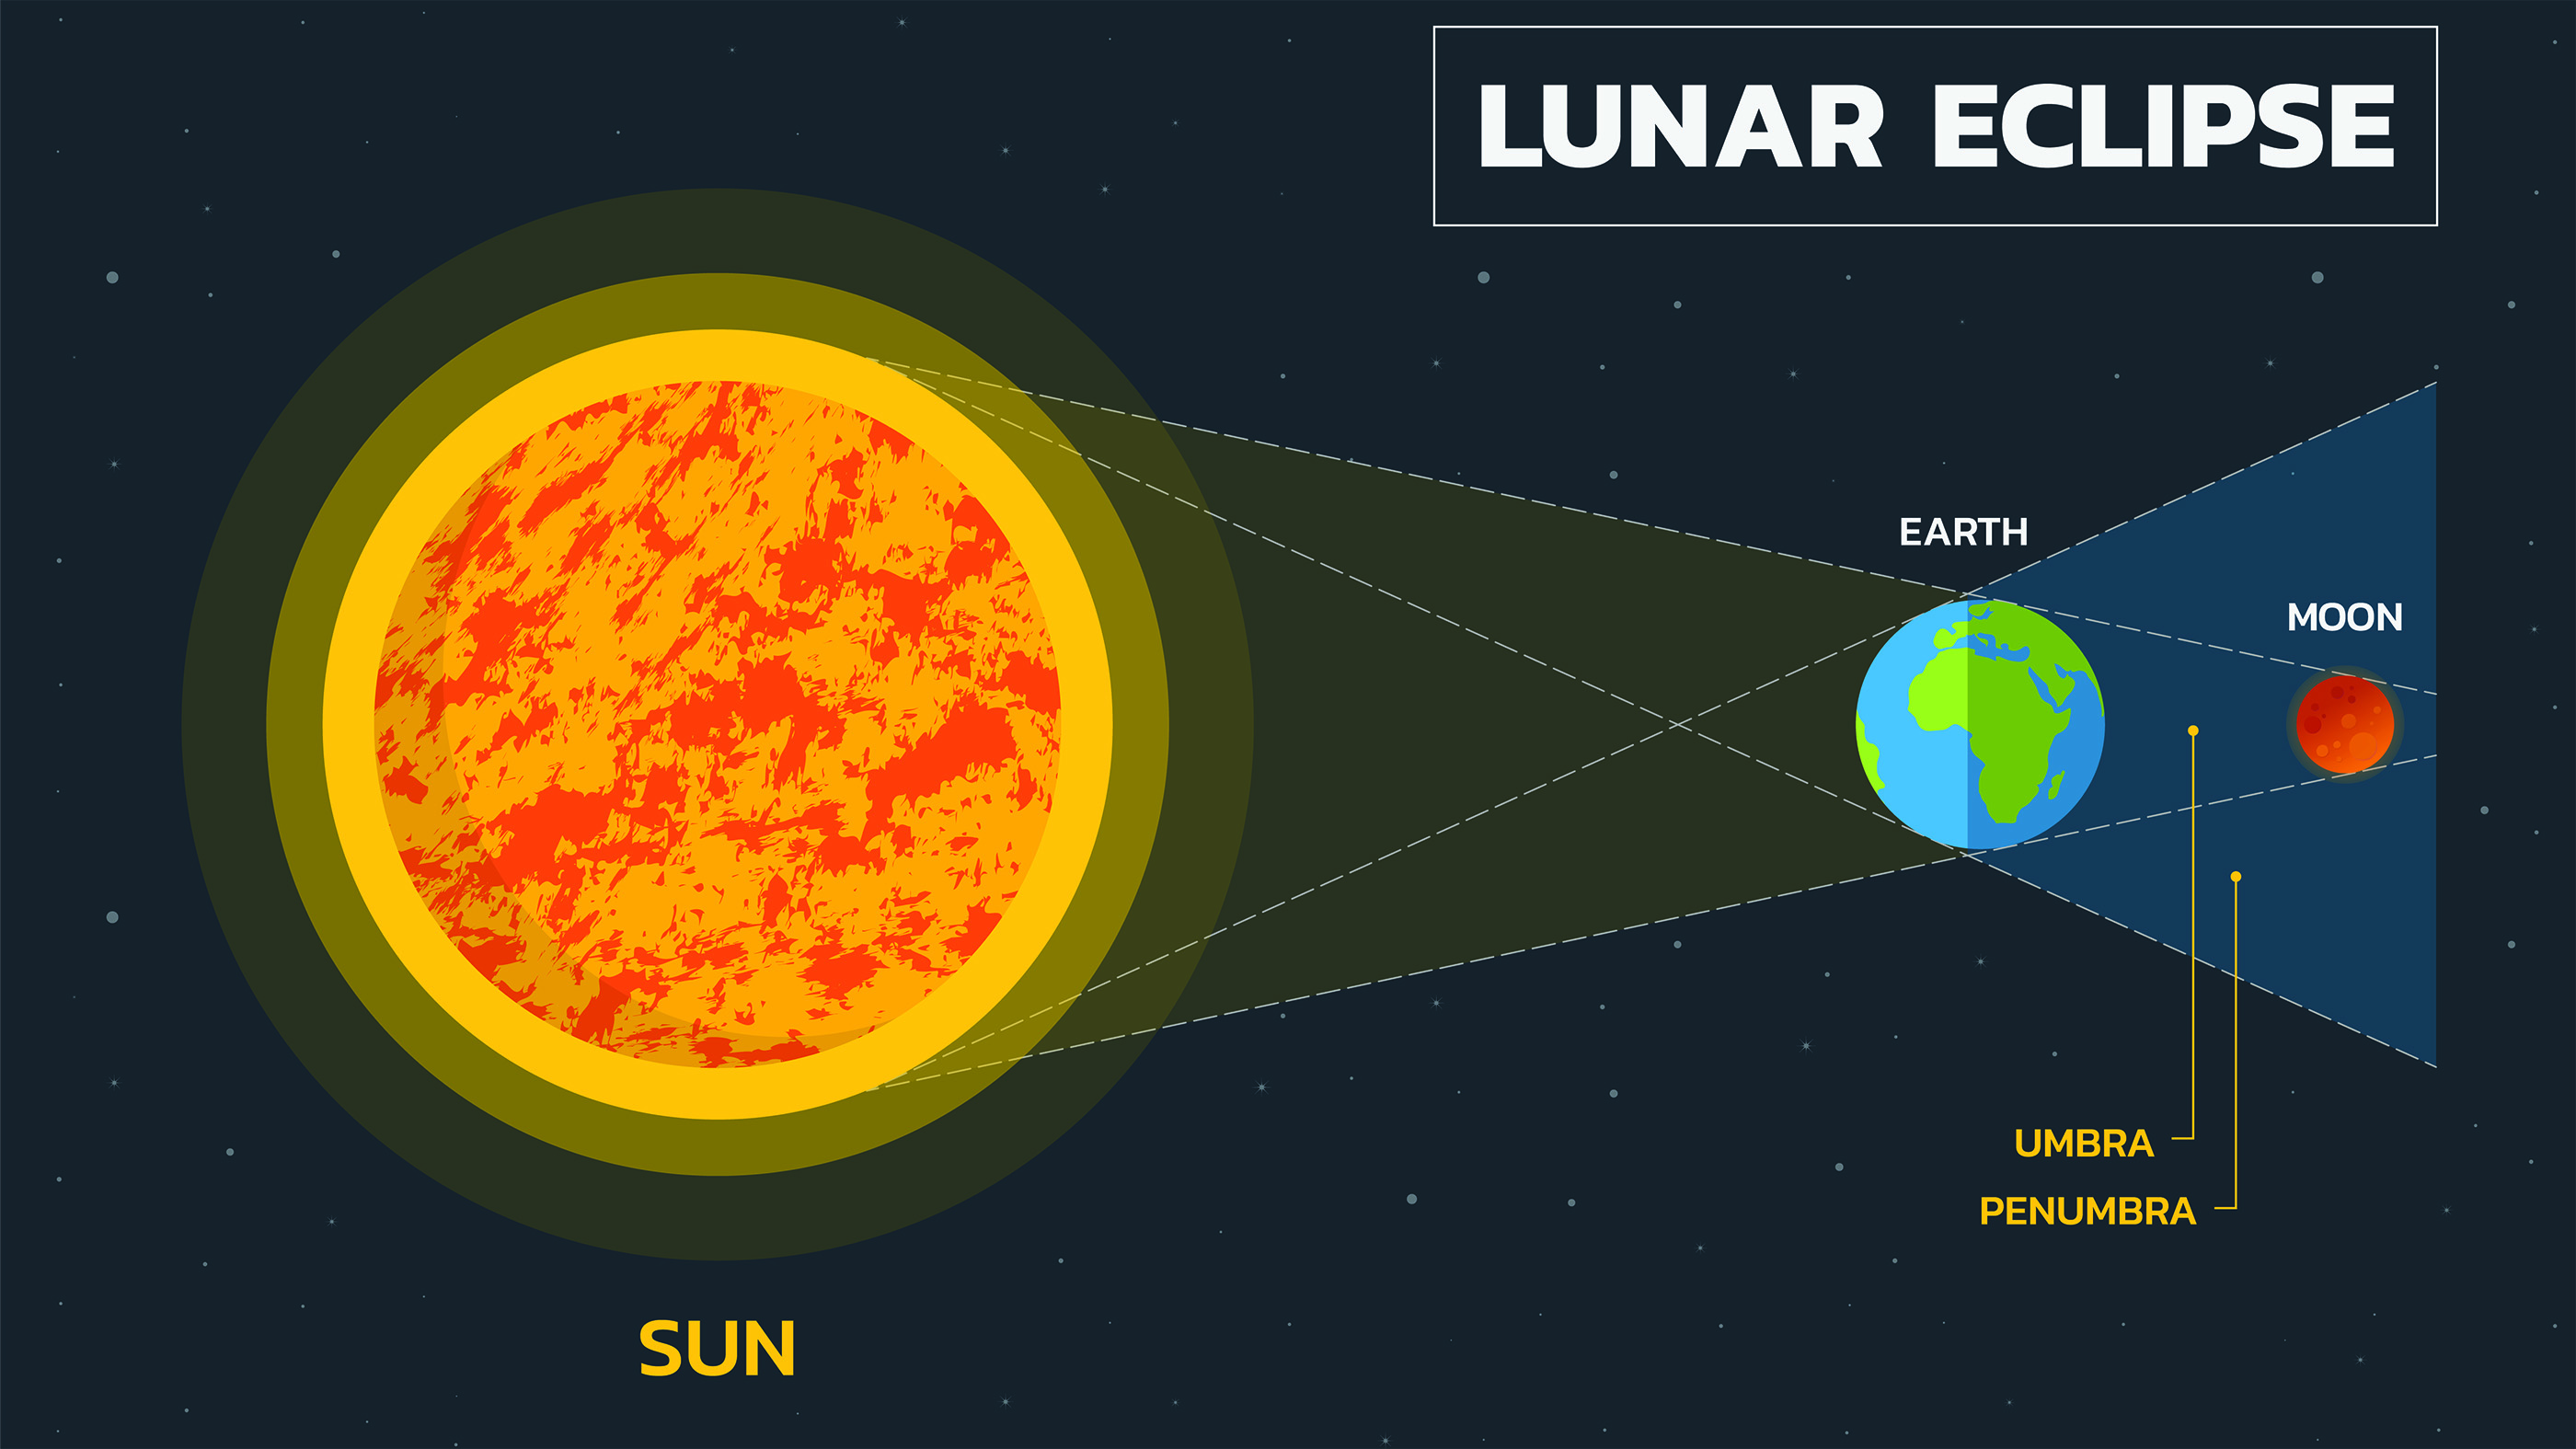 A lunar eclipse happens w hen the sun, moon and Earth are lined up in that exact order.